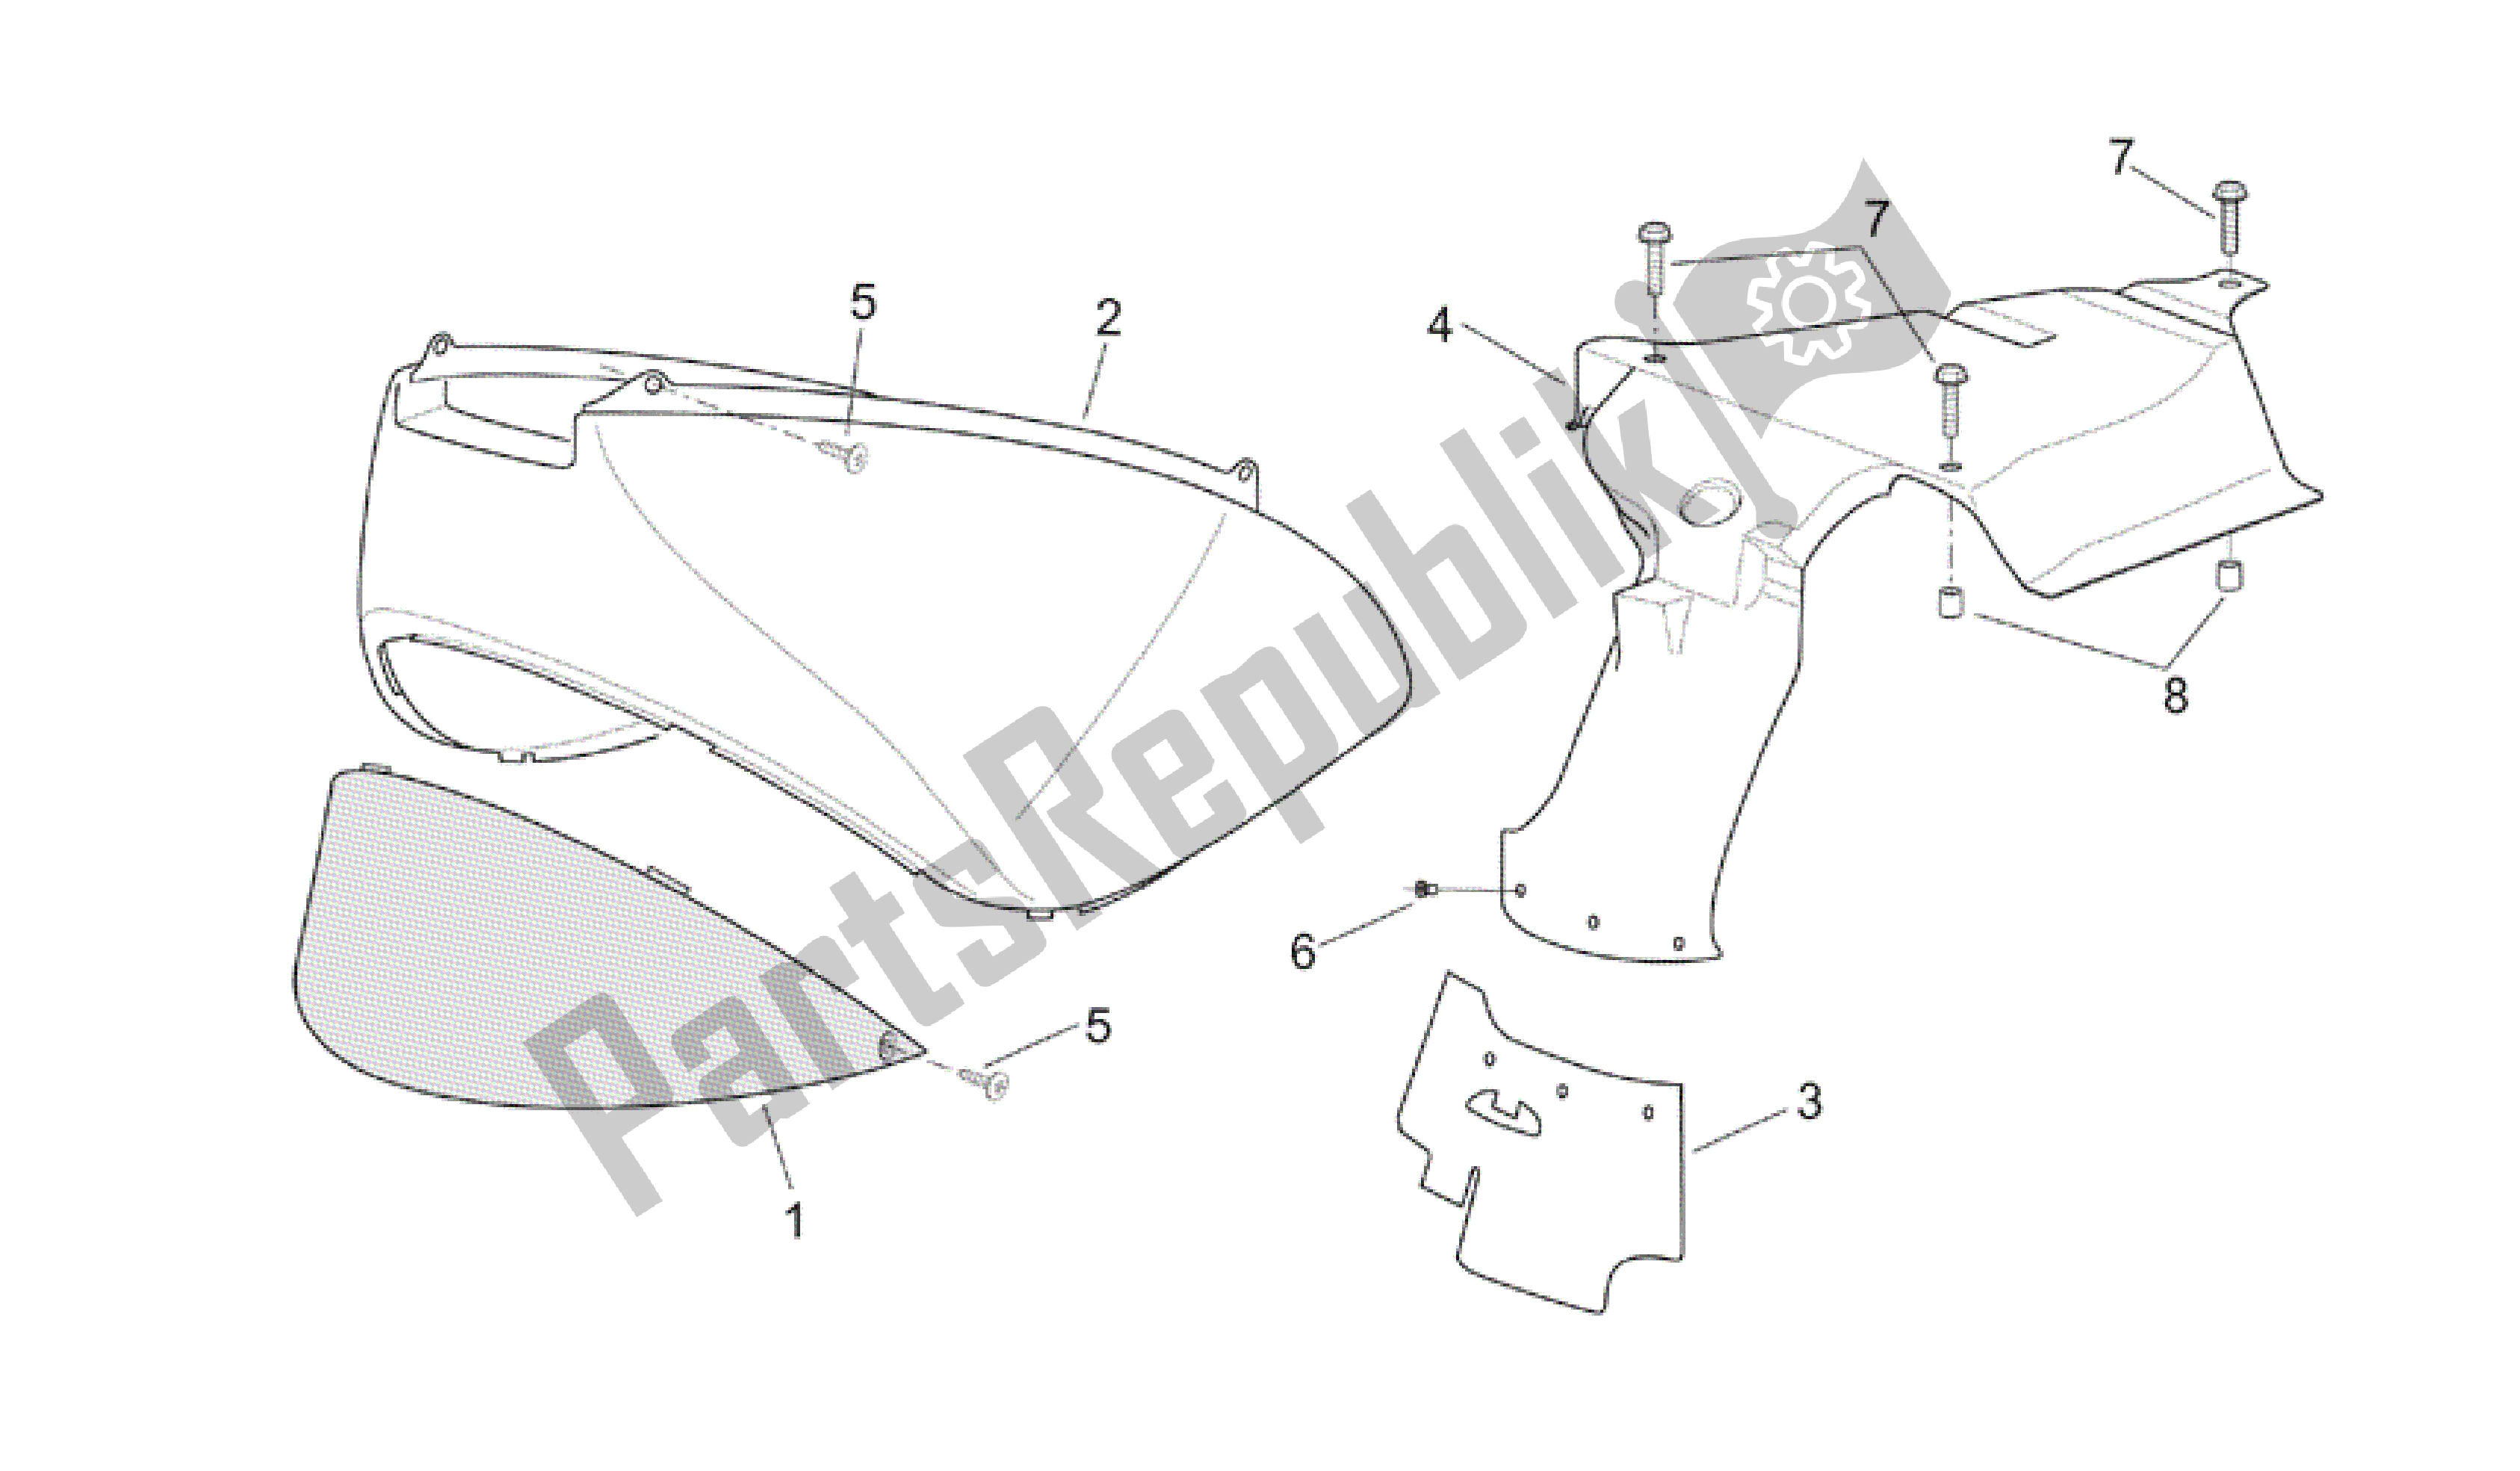 All parts for the Rear Body I of the Aprilia Scarabeo 125 1999 - 2004